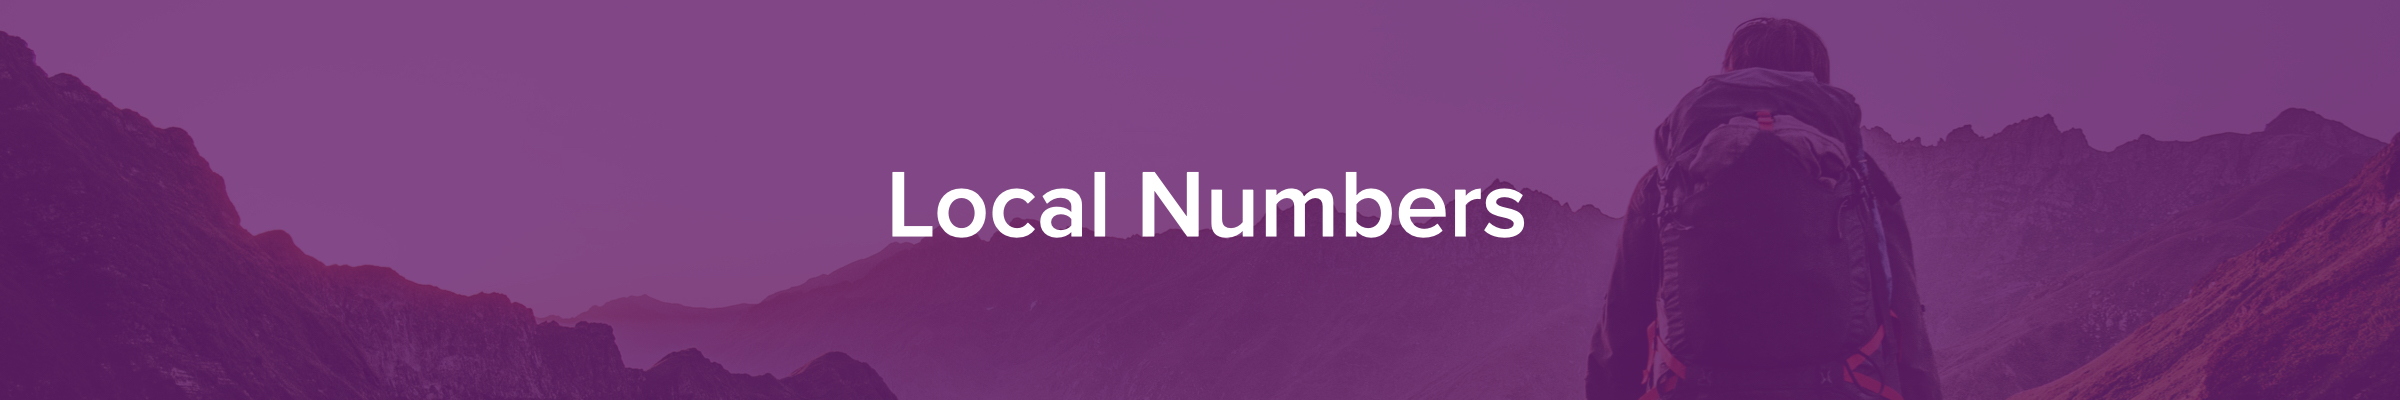 local numbers